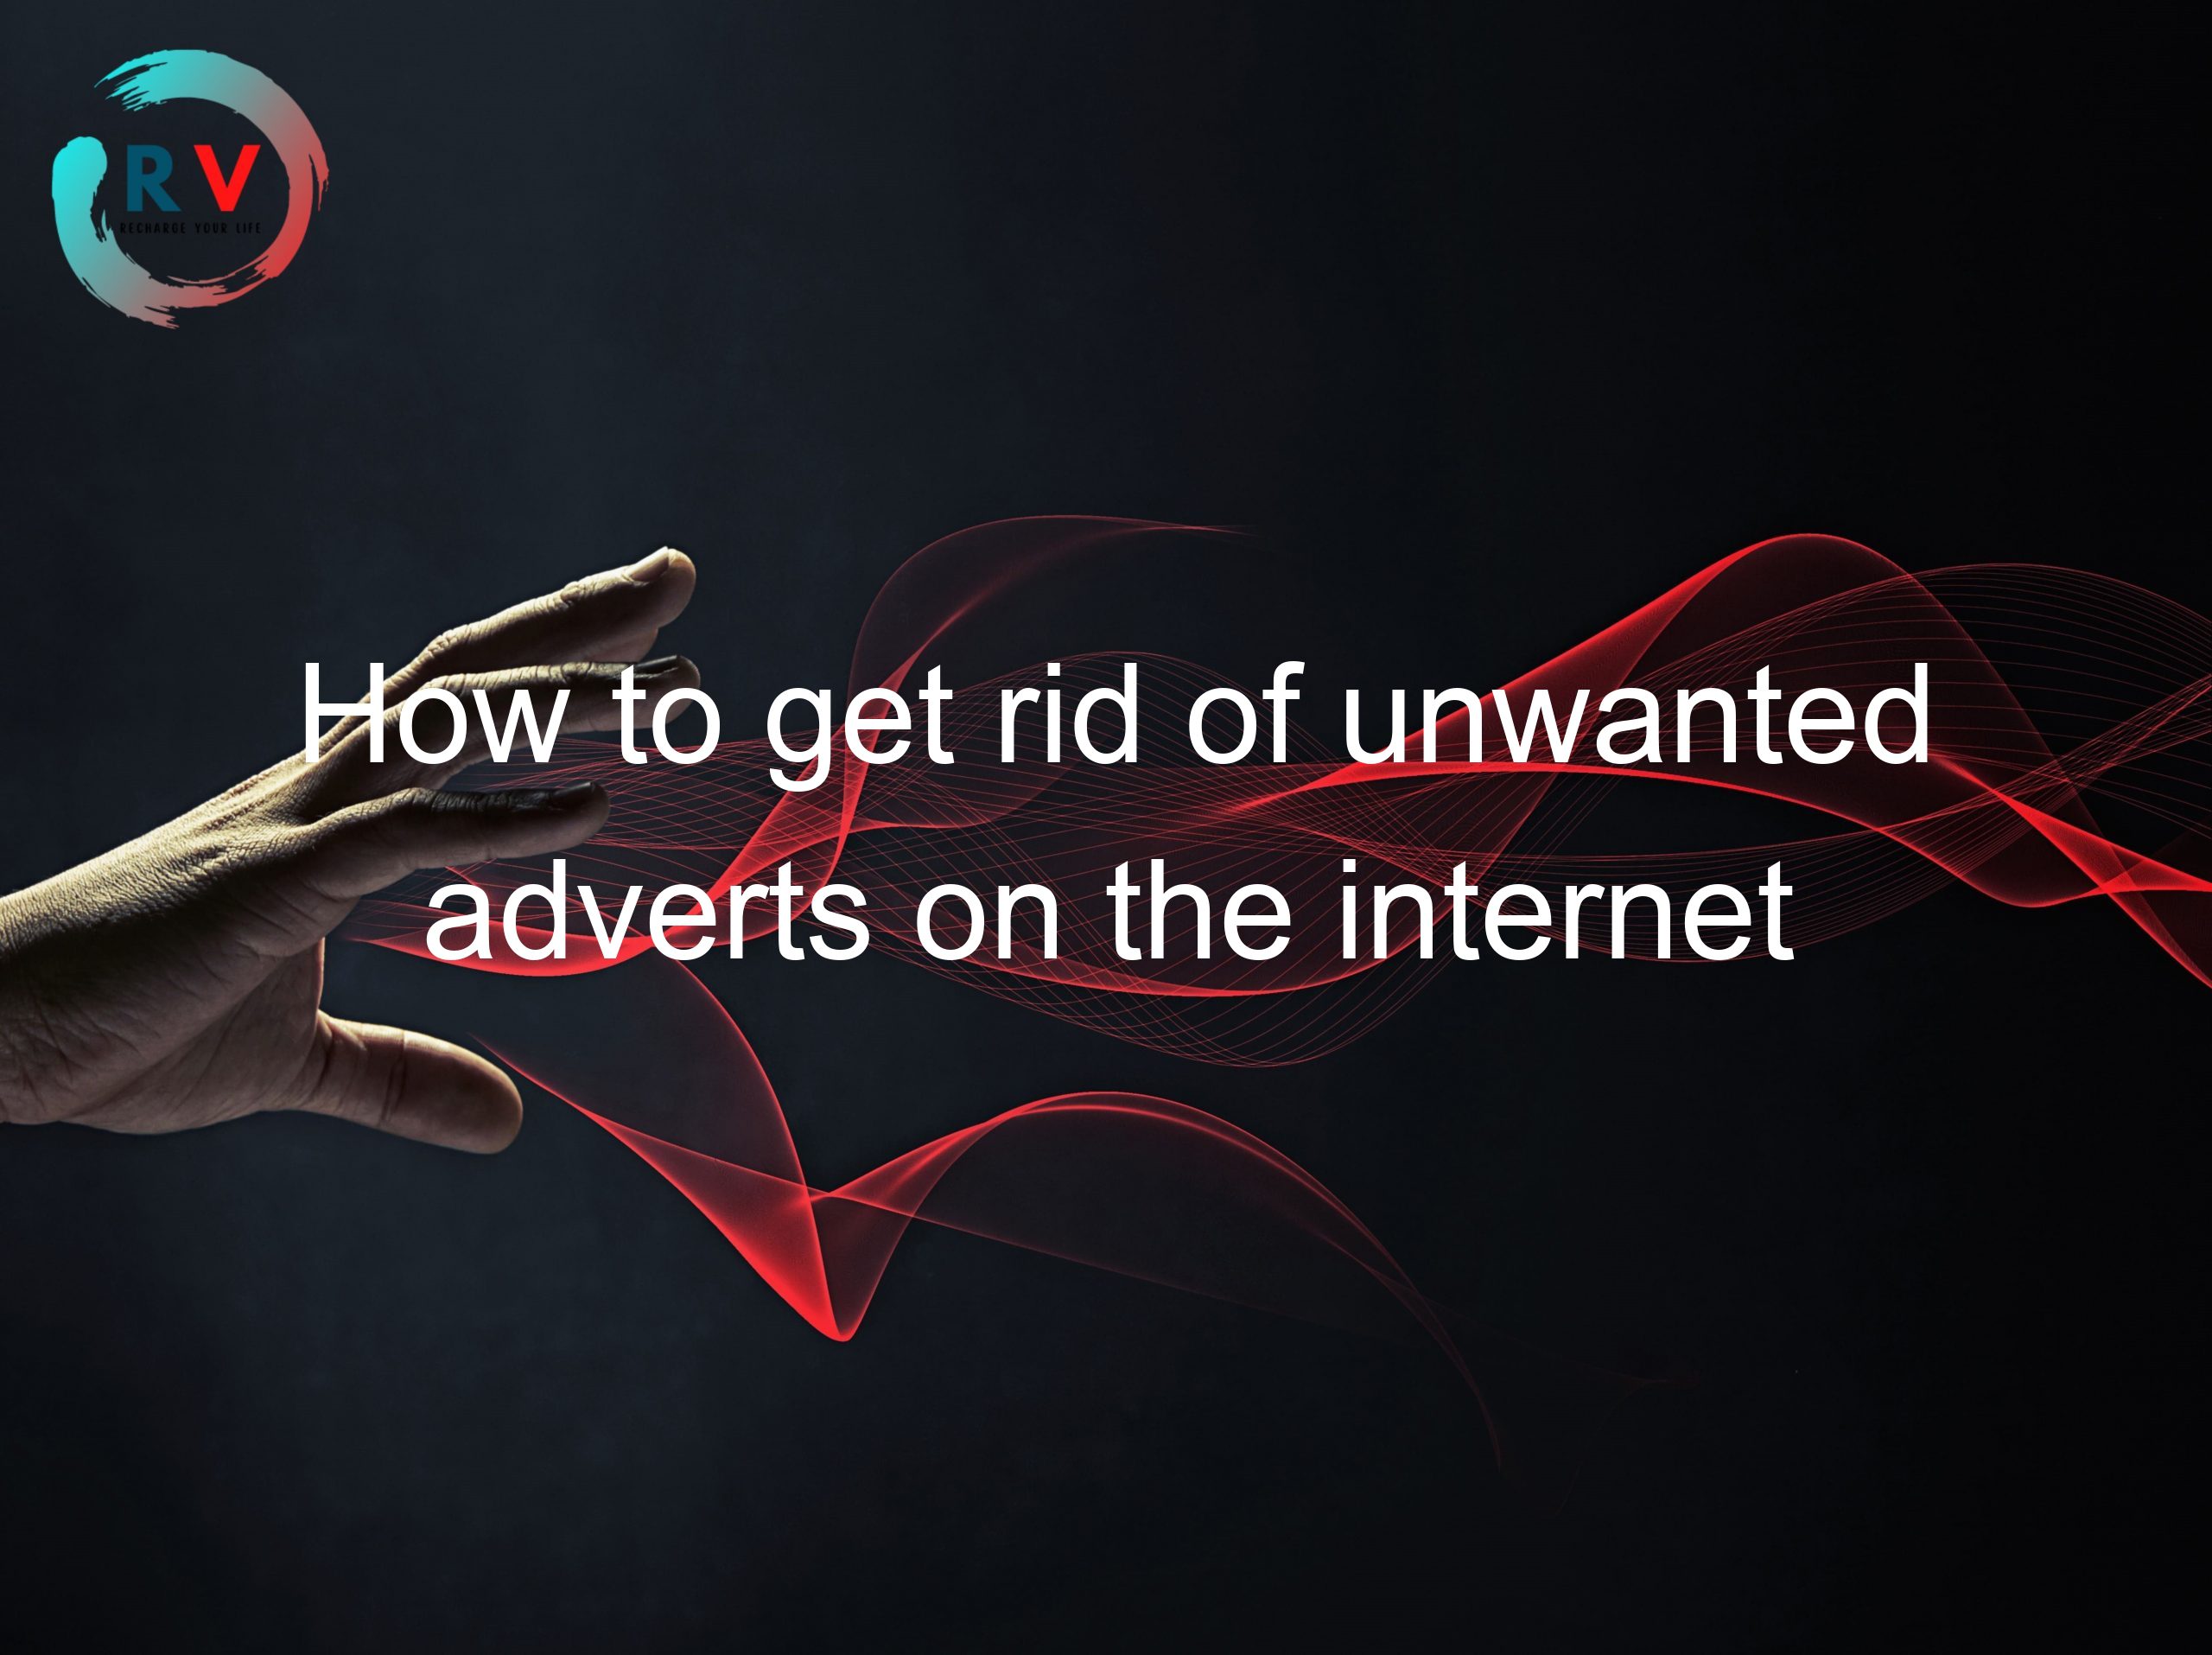 How to get rid of unwanted adverts on the internet